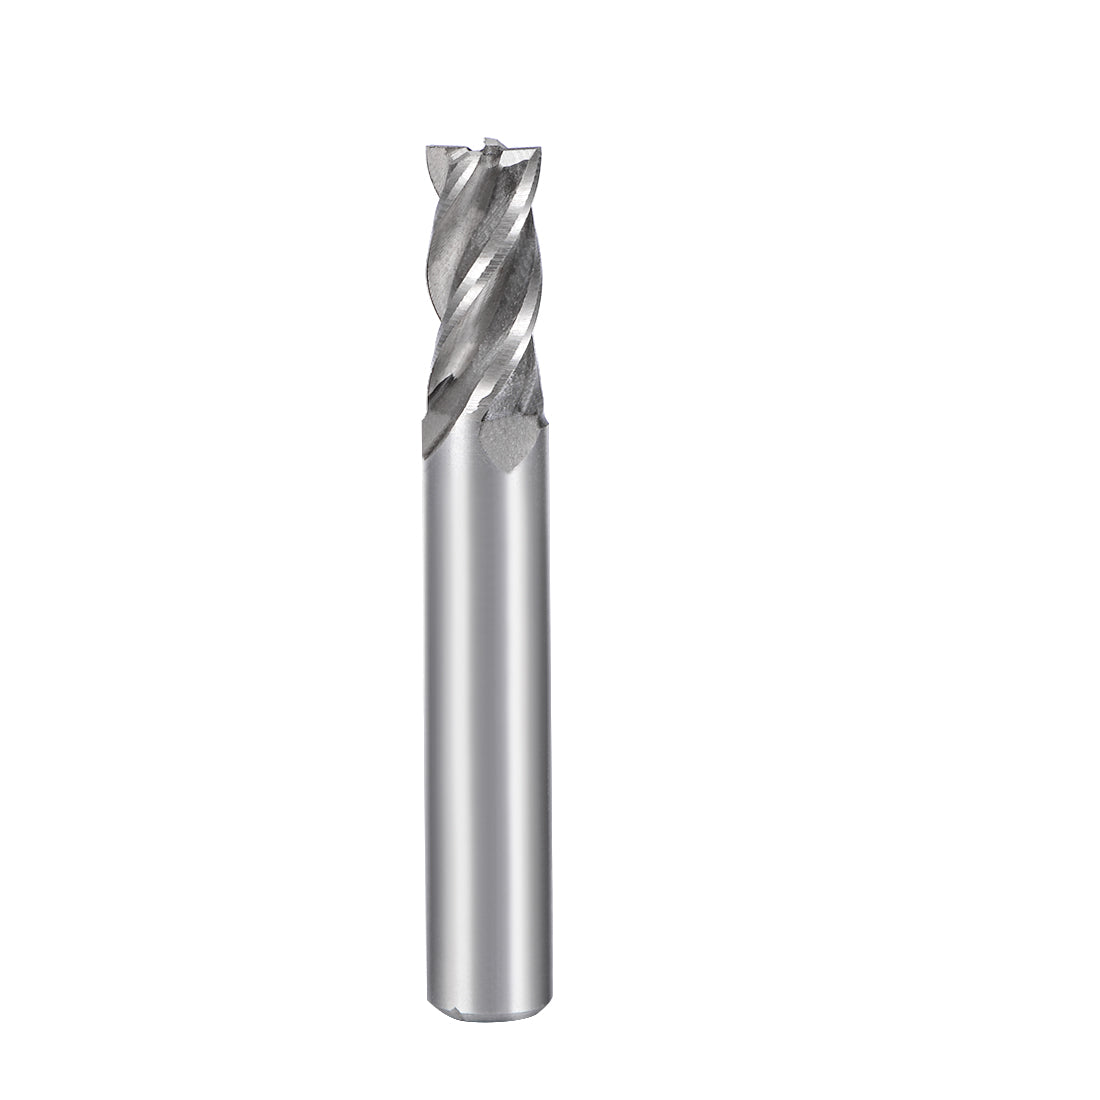 uxcell Uxcell High Speed Steel HSS-AL 4 Flute Straight End Mill Cutter CNC Router Bits, 9 x 10 x 22mm